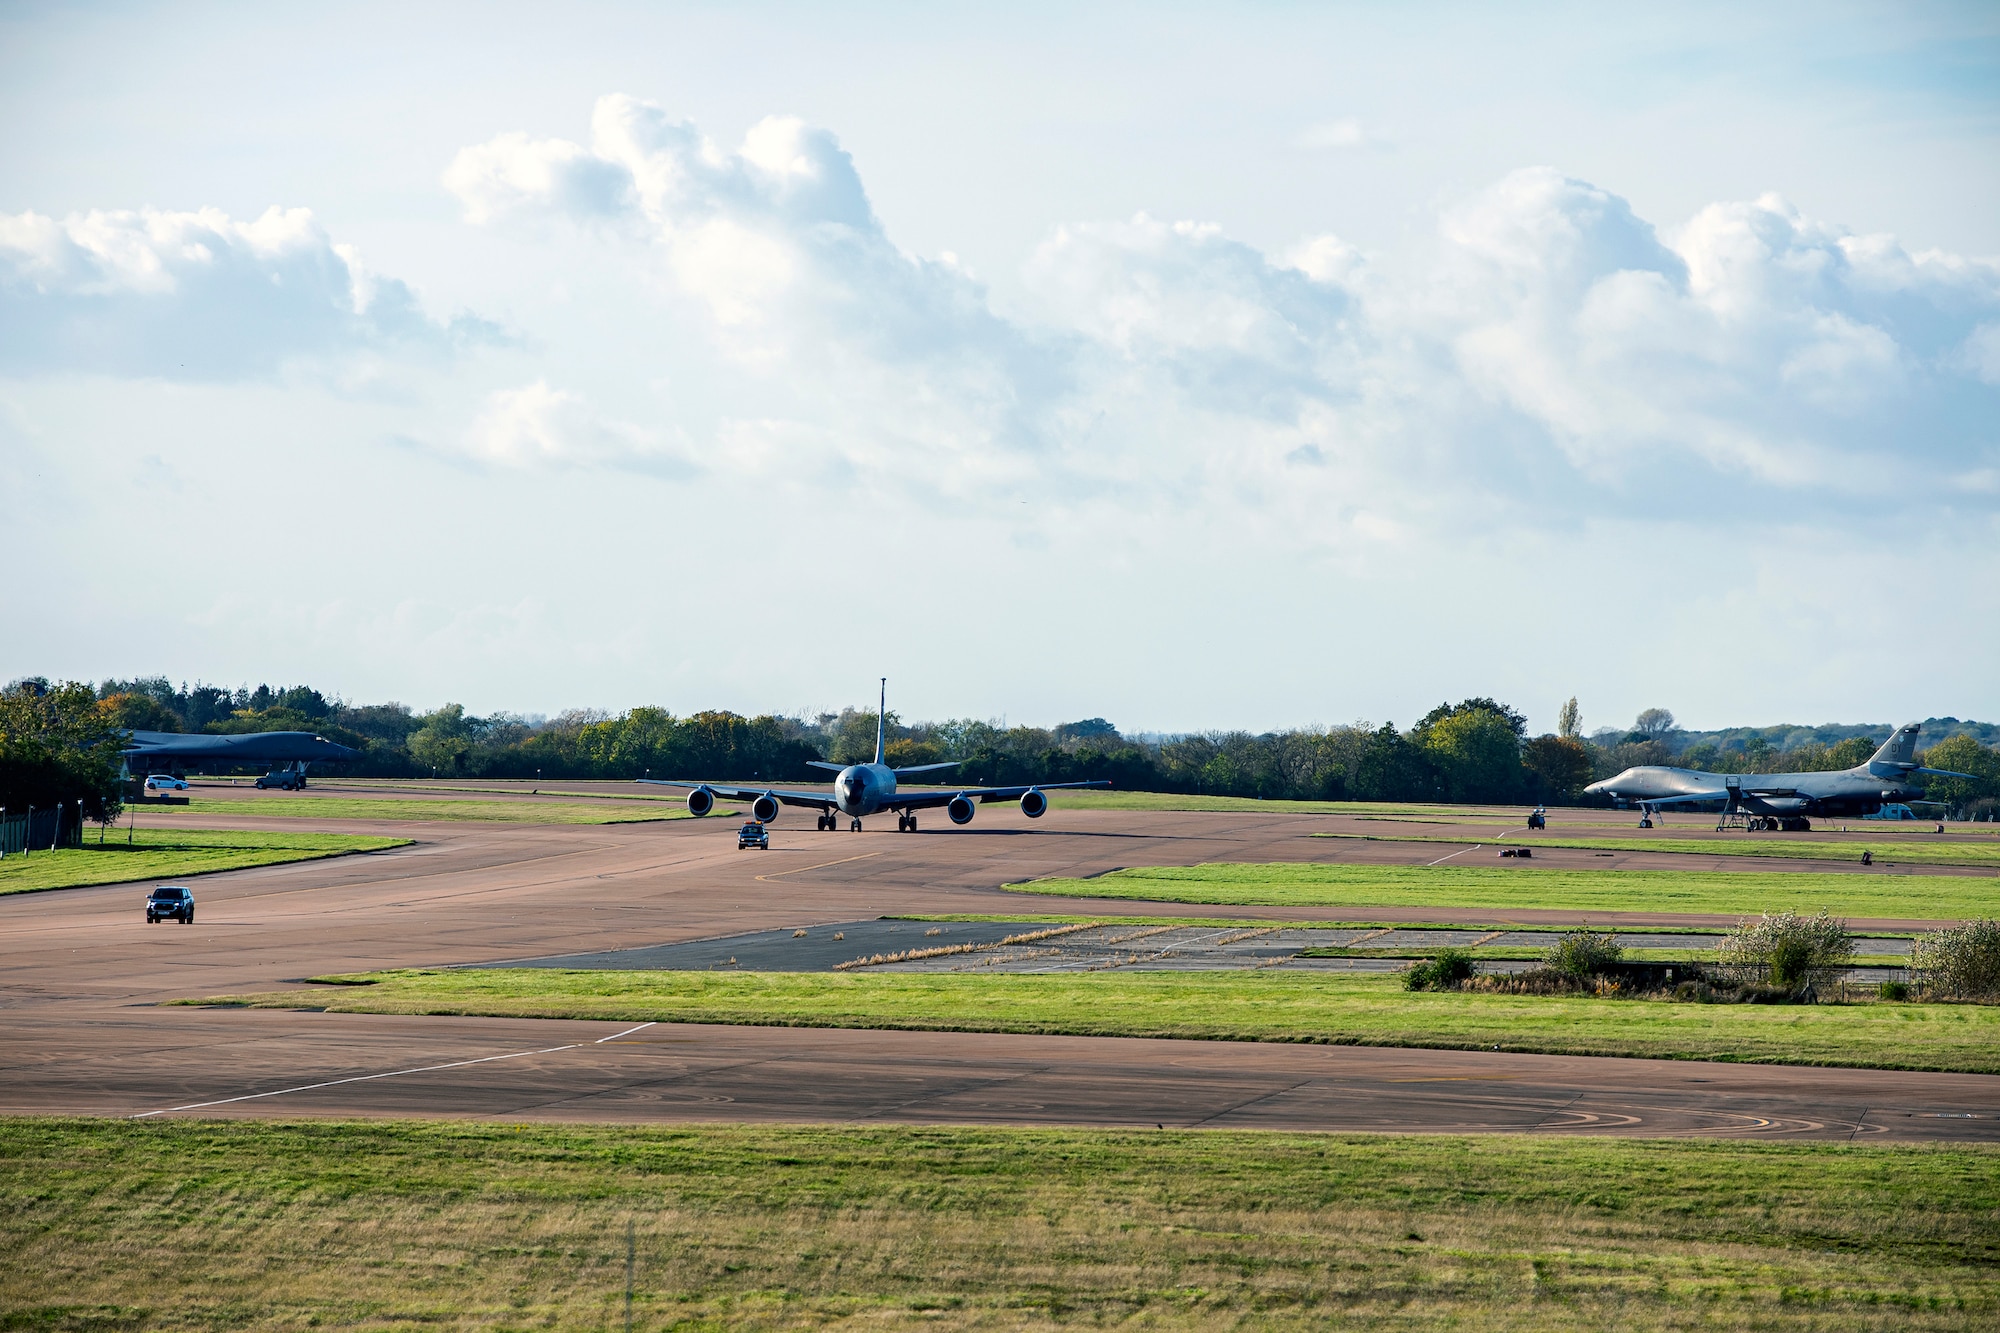 A KC-135 Stratotanker assigned to the 100th Air Refueling Wing, center, taxis on the runway at RAF Fairford, England, Nov. 1, 2021. Airmen from the 100th ARW conducted operations out of RAFF as part of an Agile Combat Employment exercise. The operations taking place at Fairford provide a dynamic and partnership-focused training environment which ensures U.S. forces remain postured to deliver airpower across the European theater while strengthening interoperability with our NATO allies. (U.S. Air Force photo by Senior Airman Eugene Oliver)